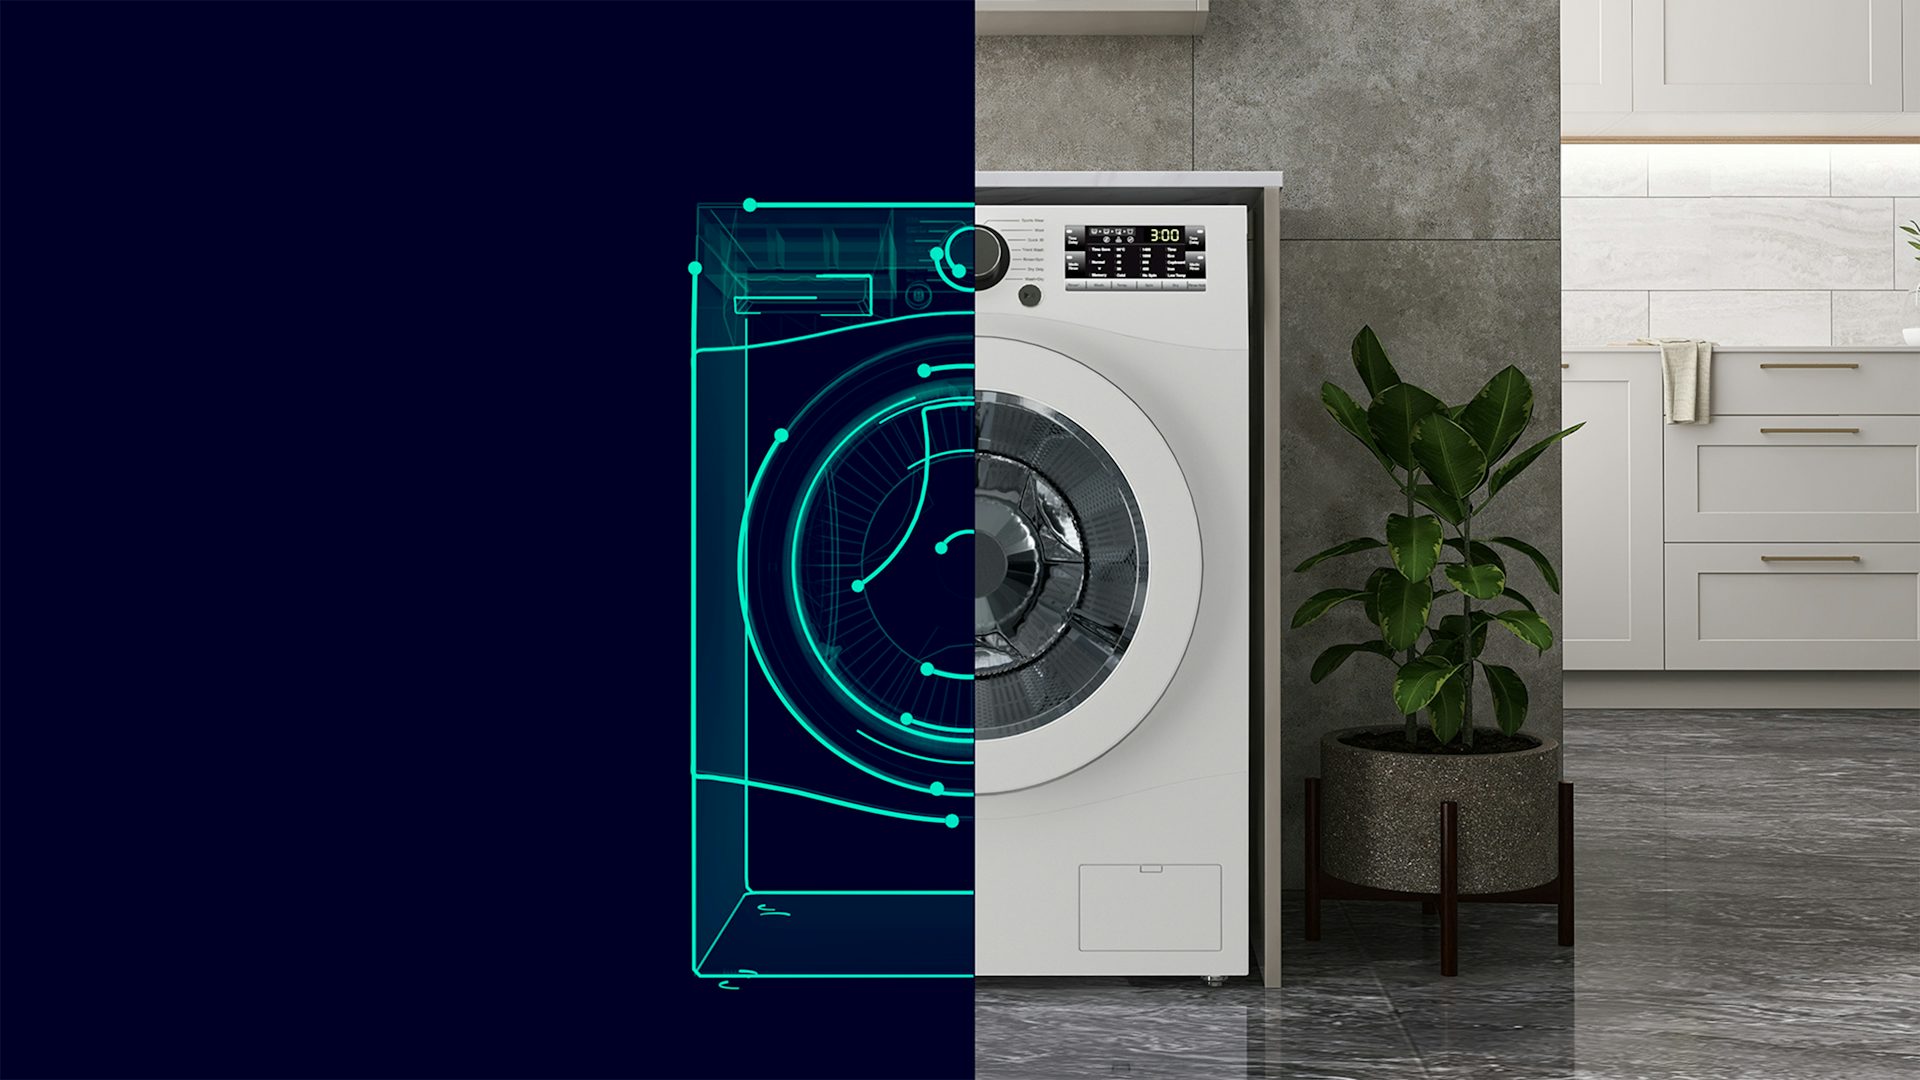 Digital Twin of a washing machine, with the left half a monochromatic graphic and the right half an image